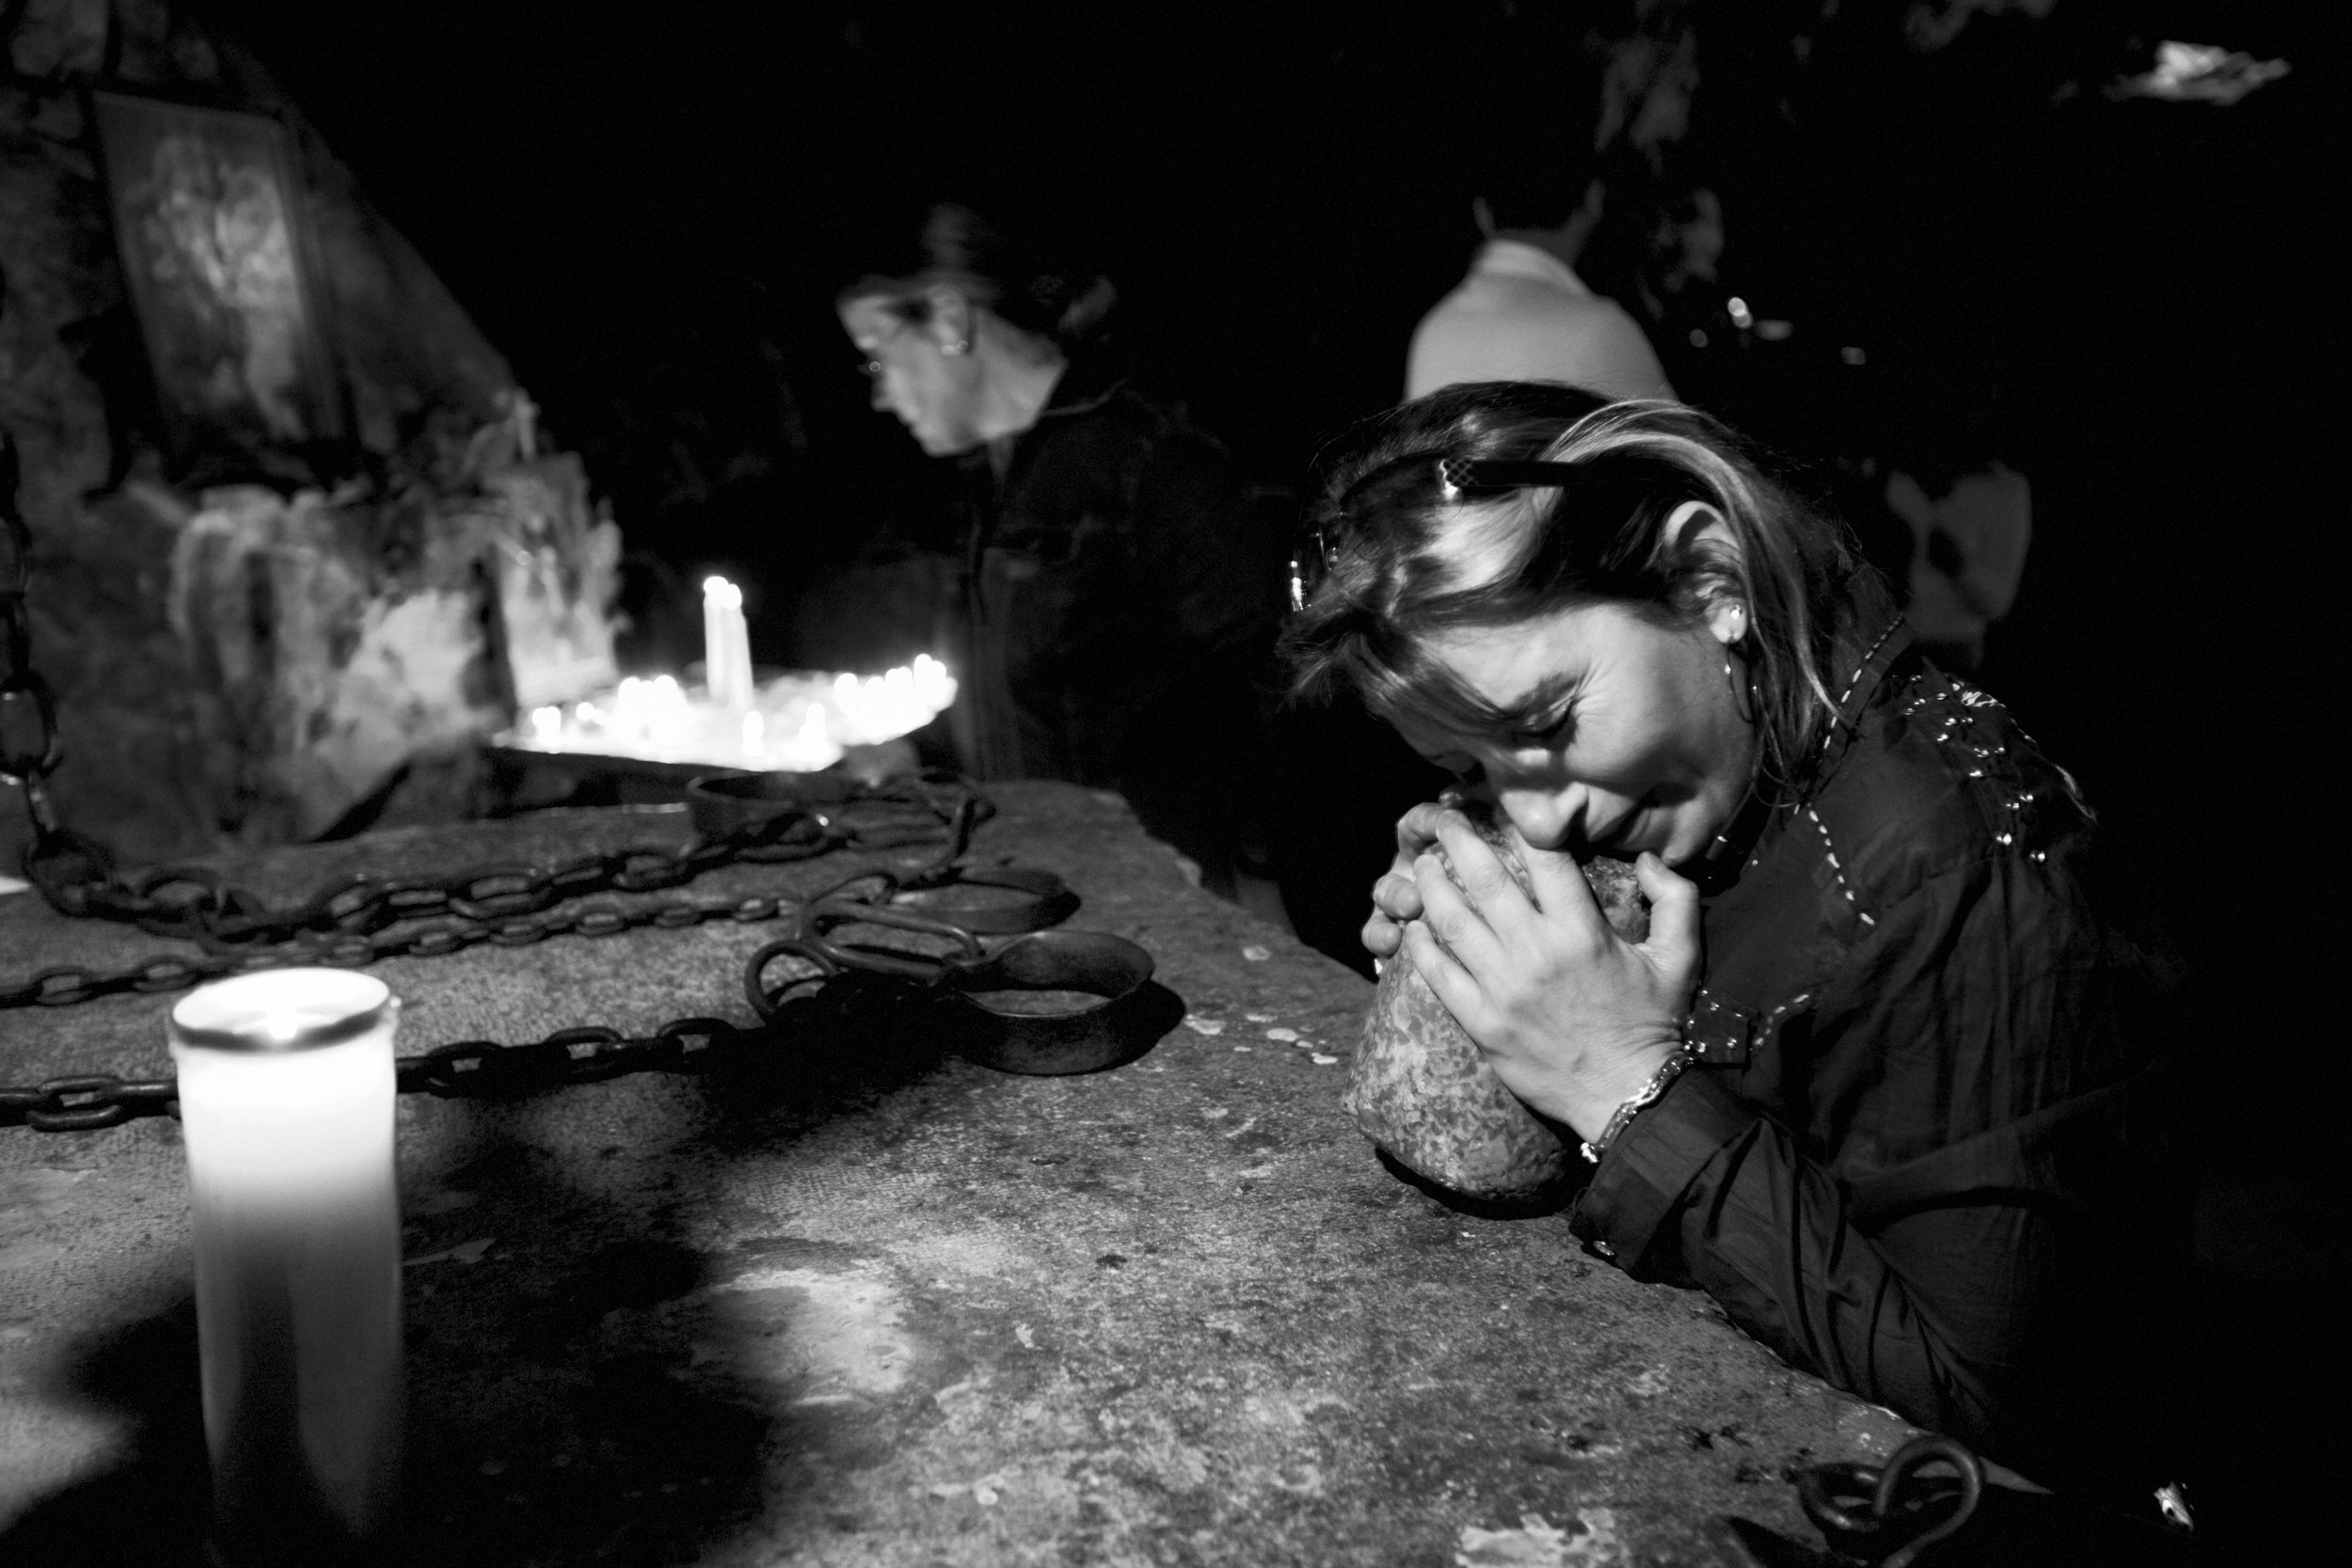  A Christian woman is overcome with emotion as she prays in the cave of the Monastery of Saint Anthony, situated in the "Holy Valley" of Qadisha, near the town of Bsharre, Lebanon on April 13, 2008. 